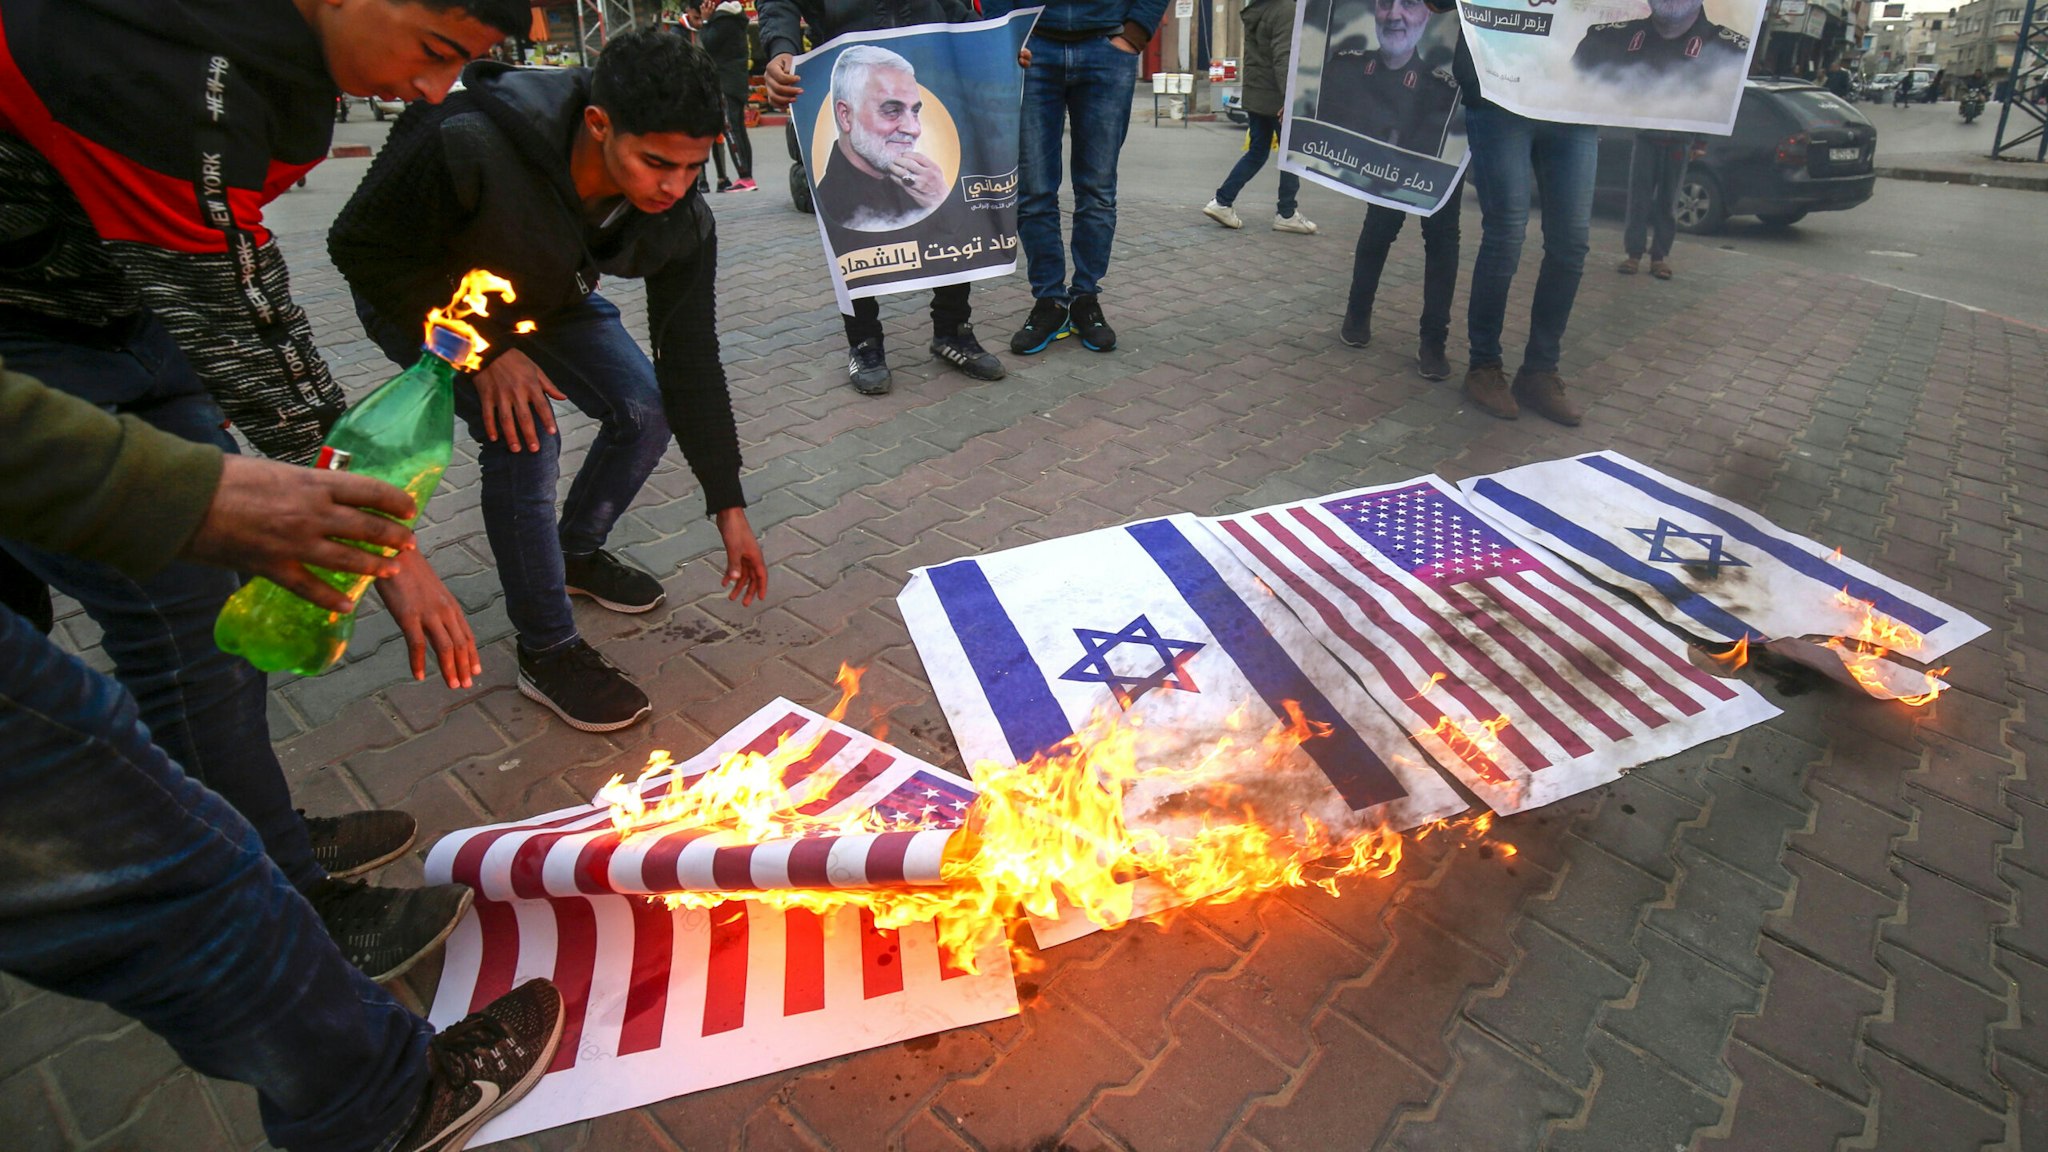 Palestinian demonstrators burn a US and an Israeli flag during a gathering in Khan Yunis in the southern Gaza Strip on January 8, 2020, organised in honour of slain Iranian military commander Qasem Soleimani (portrait) and to celebrate a volley of missiles fired by Iran at Iraqi bases housing US and other foreign troops. - Portraits of Qasem Soleimani have been carried aloft in rallies from Gaza to Yemen, raising the prospect that his violent death will elevate him as an icon of anti-American resistance.